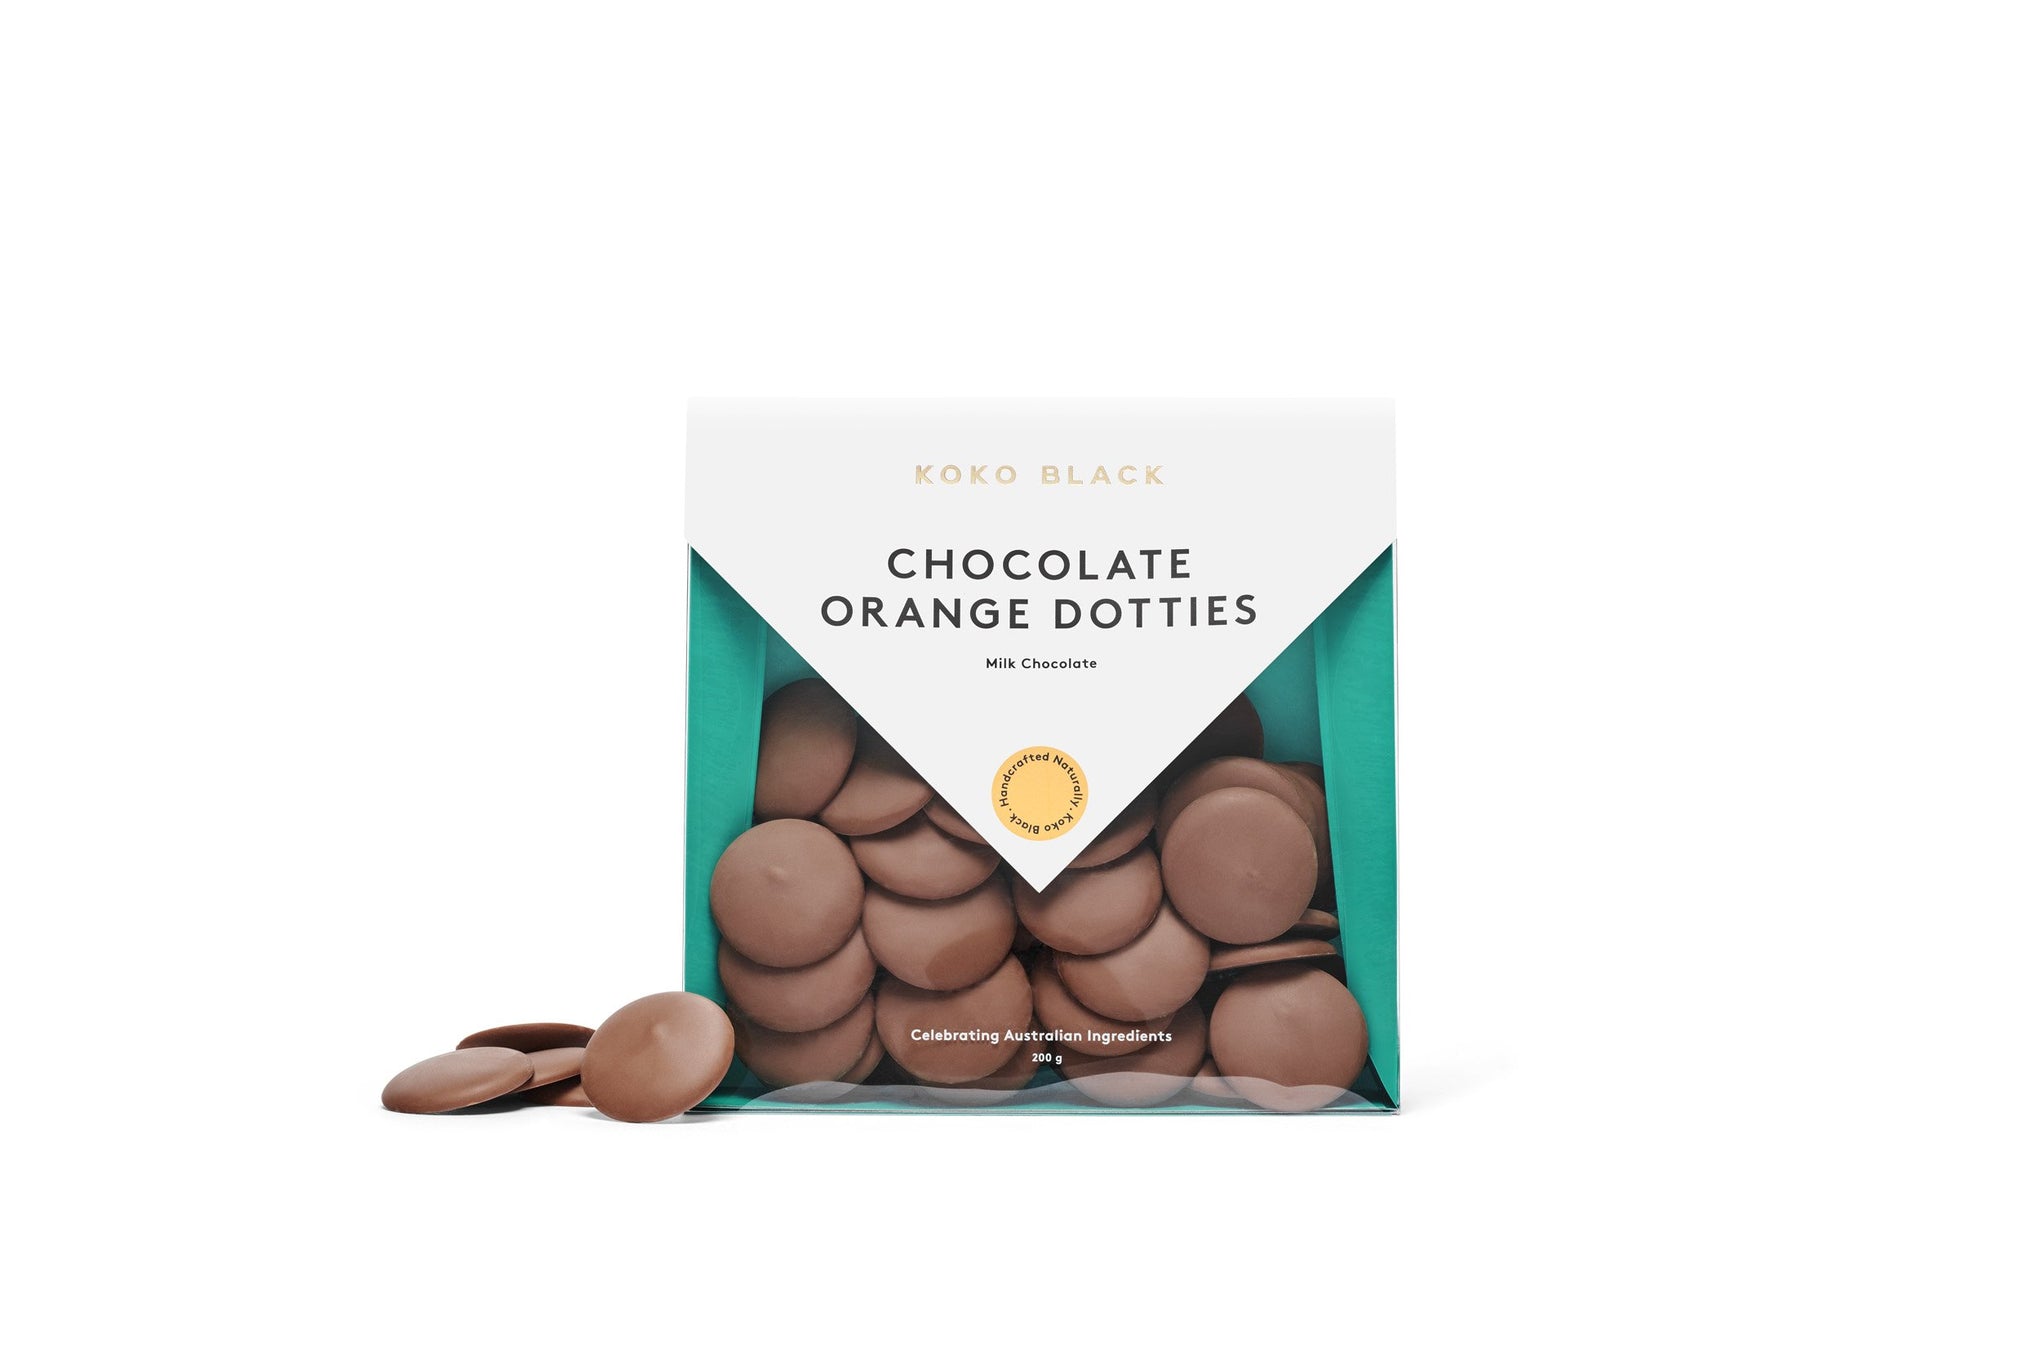 Chocolate rounds to the side of packaging